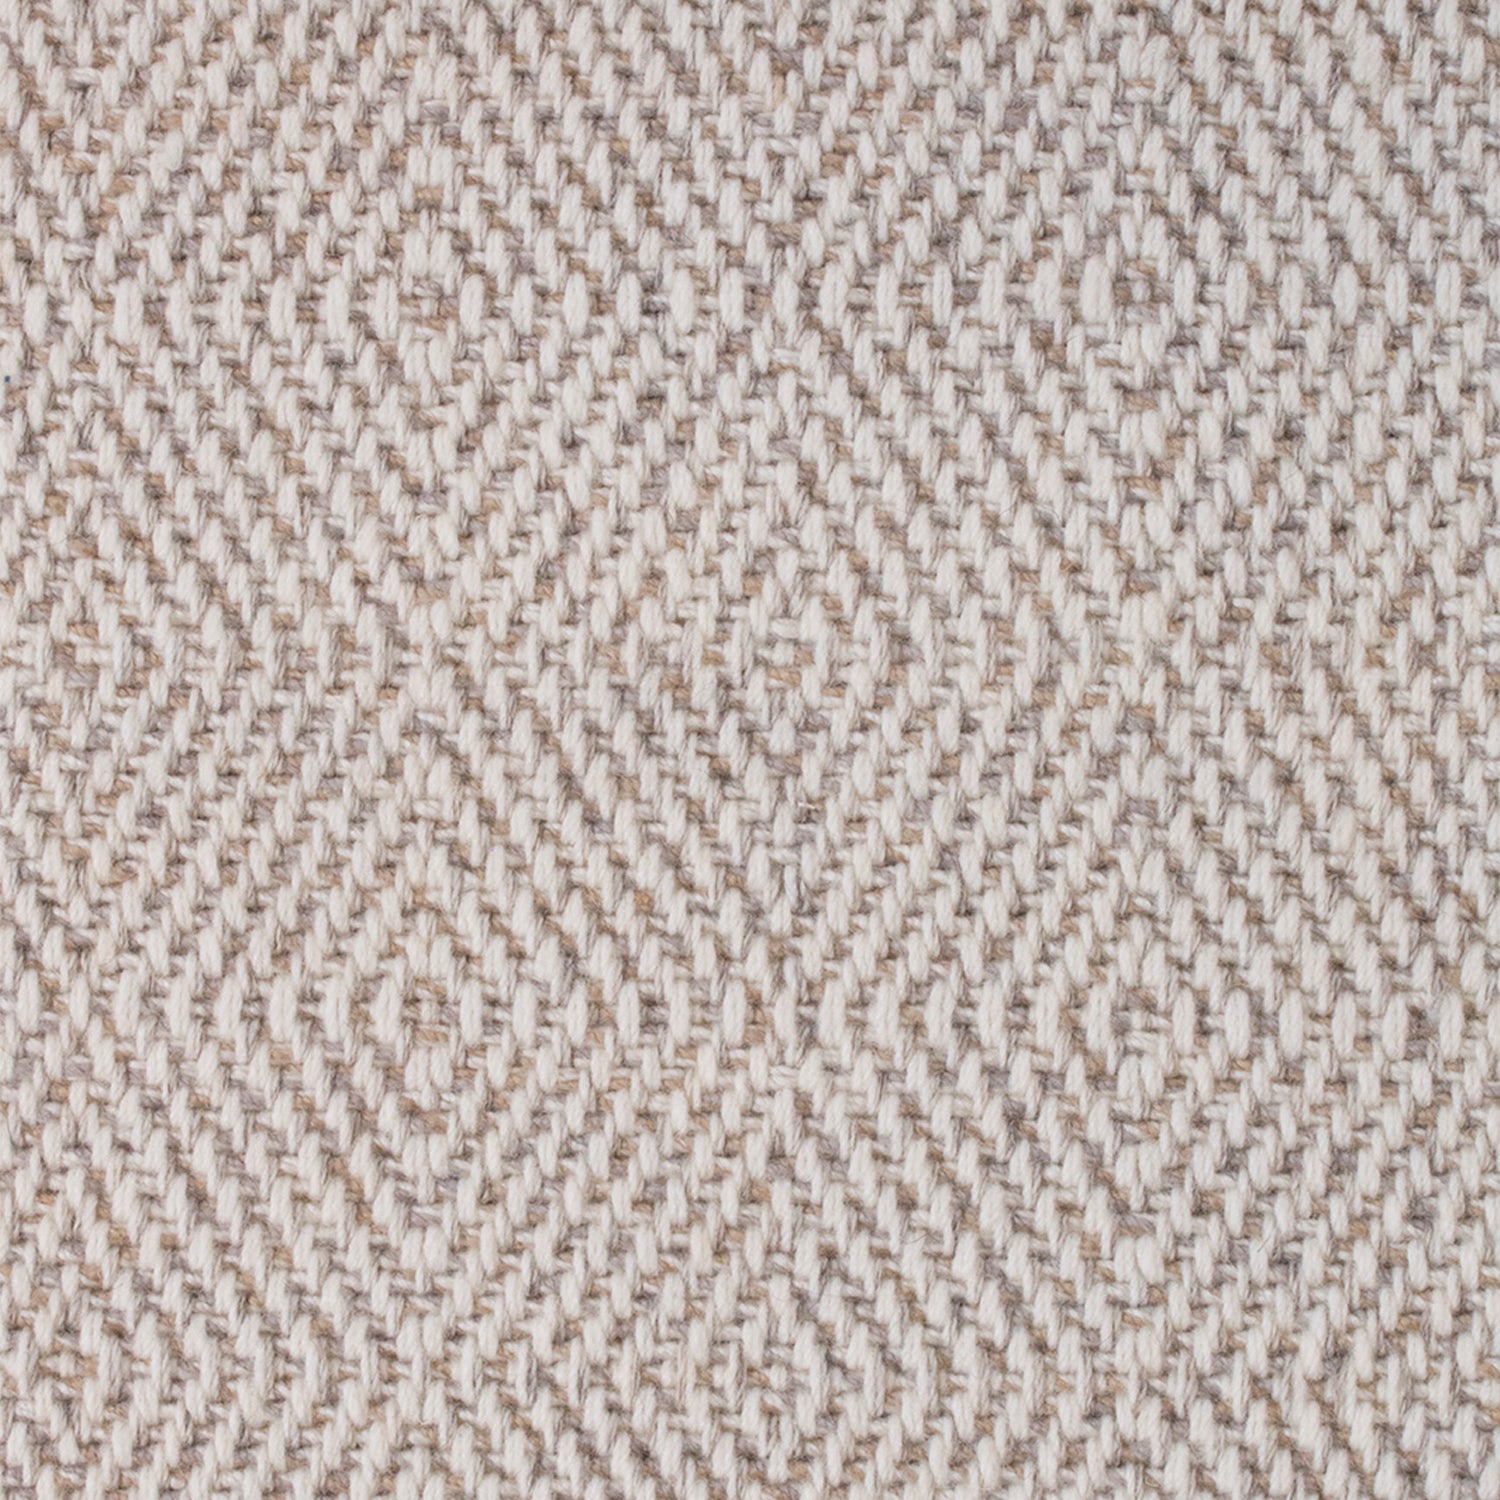 Wool-blend broadloom carpet swatch in a chunky diamond weave in mottled shades of cream, brown and gray.